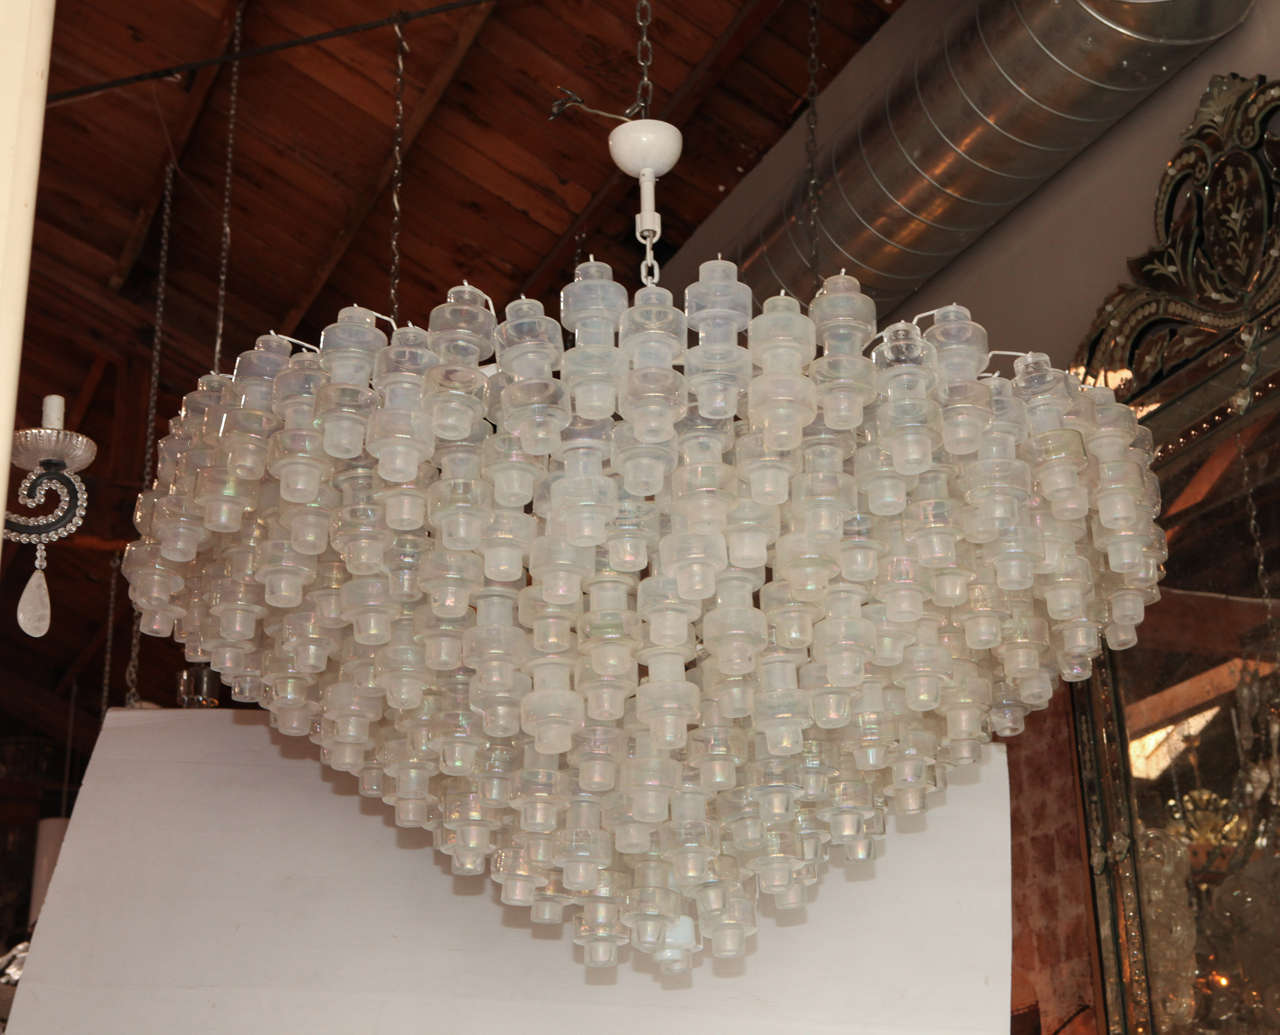 Huge and Impressive Murano Chandelier in the Style of  Manubri by Venini<br />
Murano glass is clear and frosted glass. Hardware is white enamel. Height to the top of the canopy is 53 inches. Height of just the glass section is 28 inches.